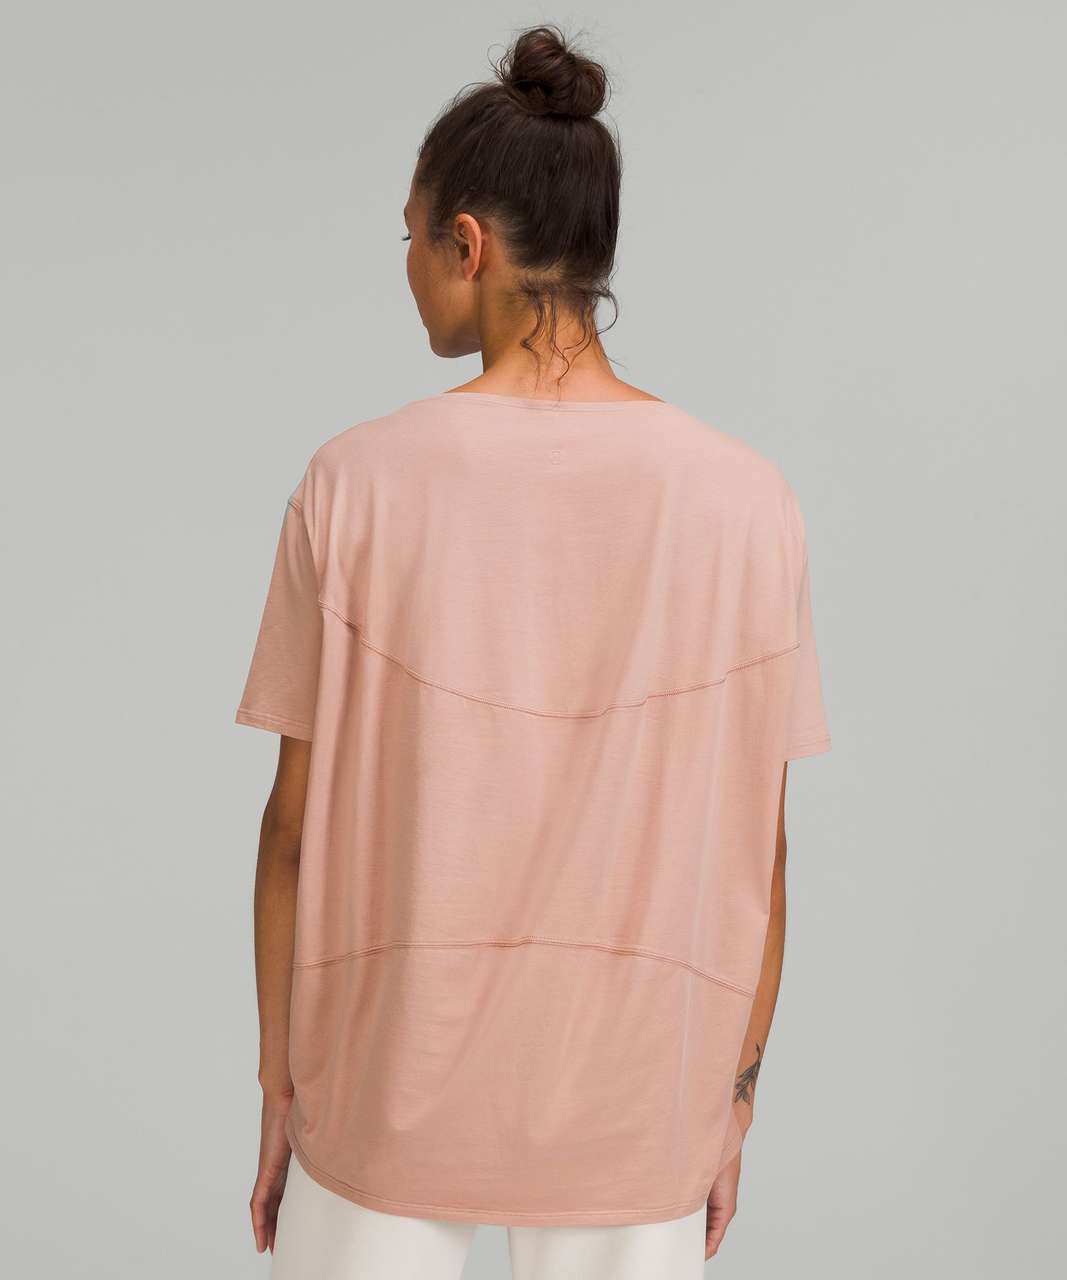 Lululemon Back in Action Short Sleeve Shirt - Pink Clay